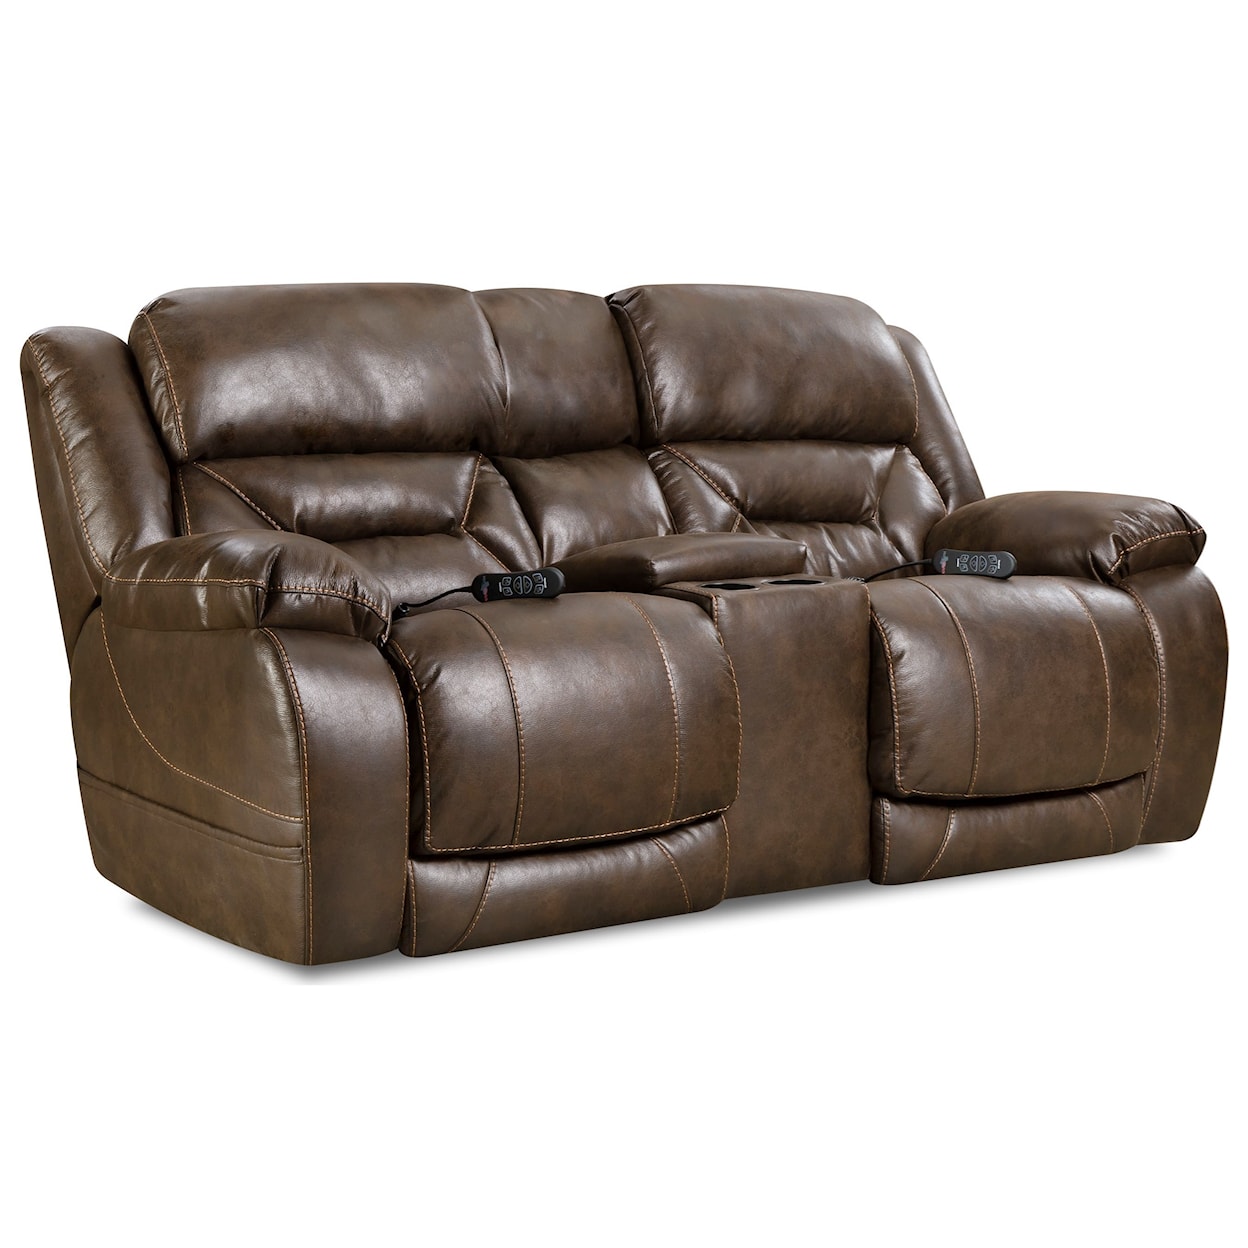 HomeStretch 158 Power Reclining Console Loveseat